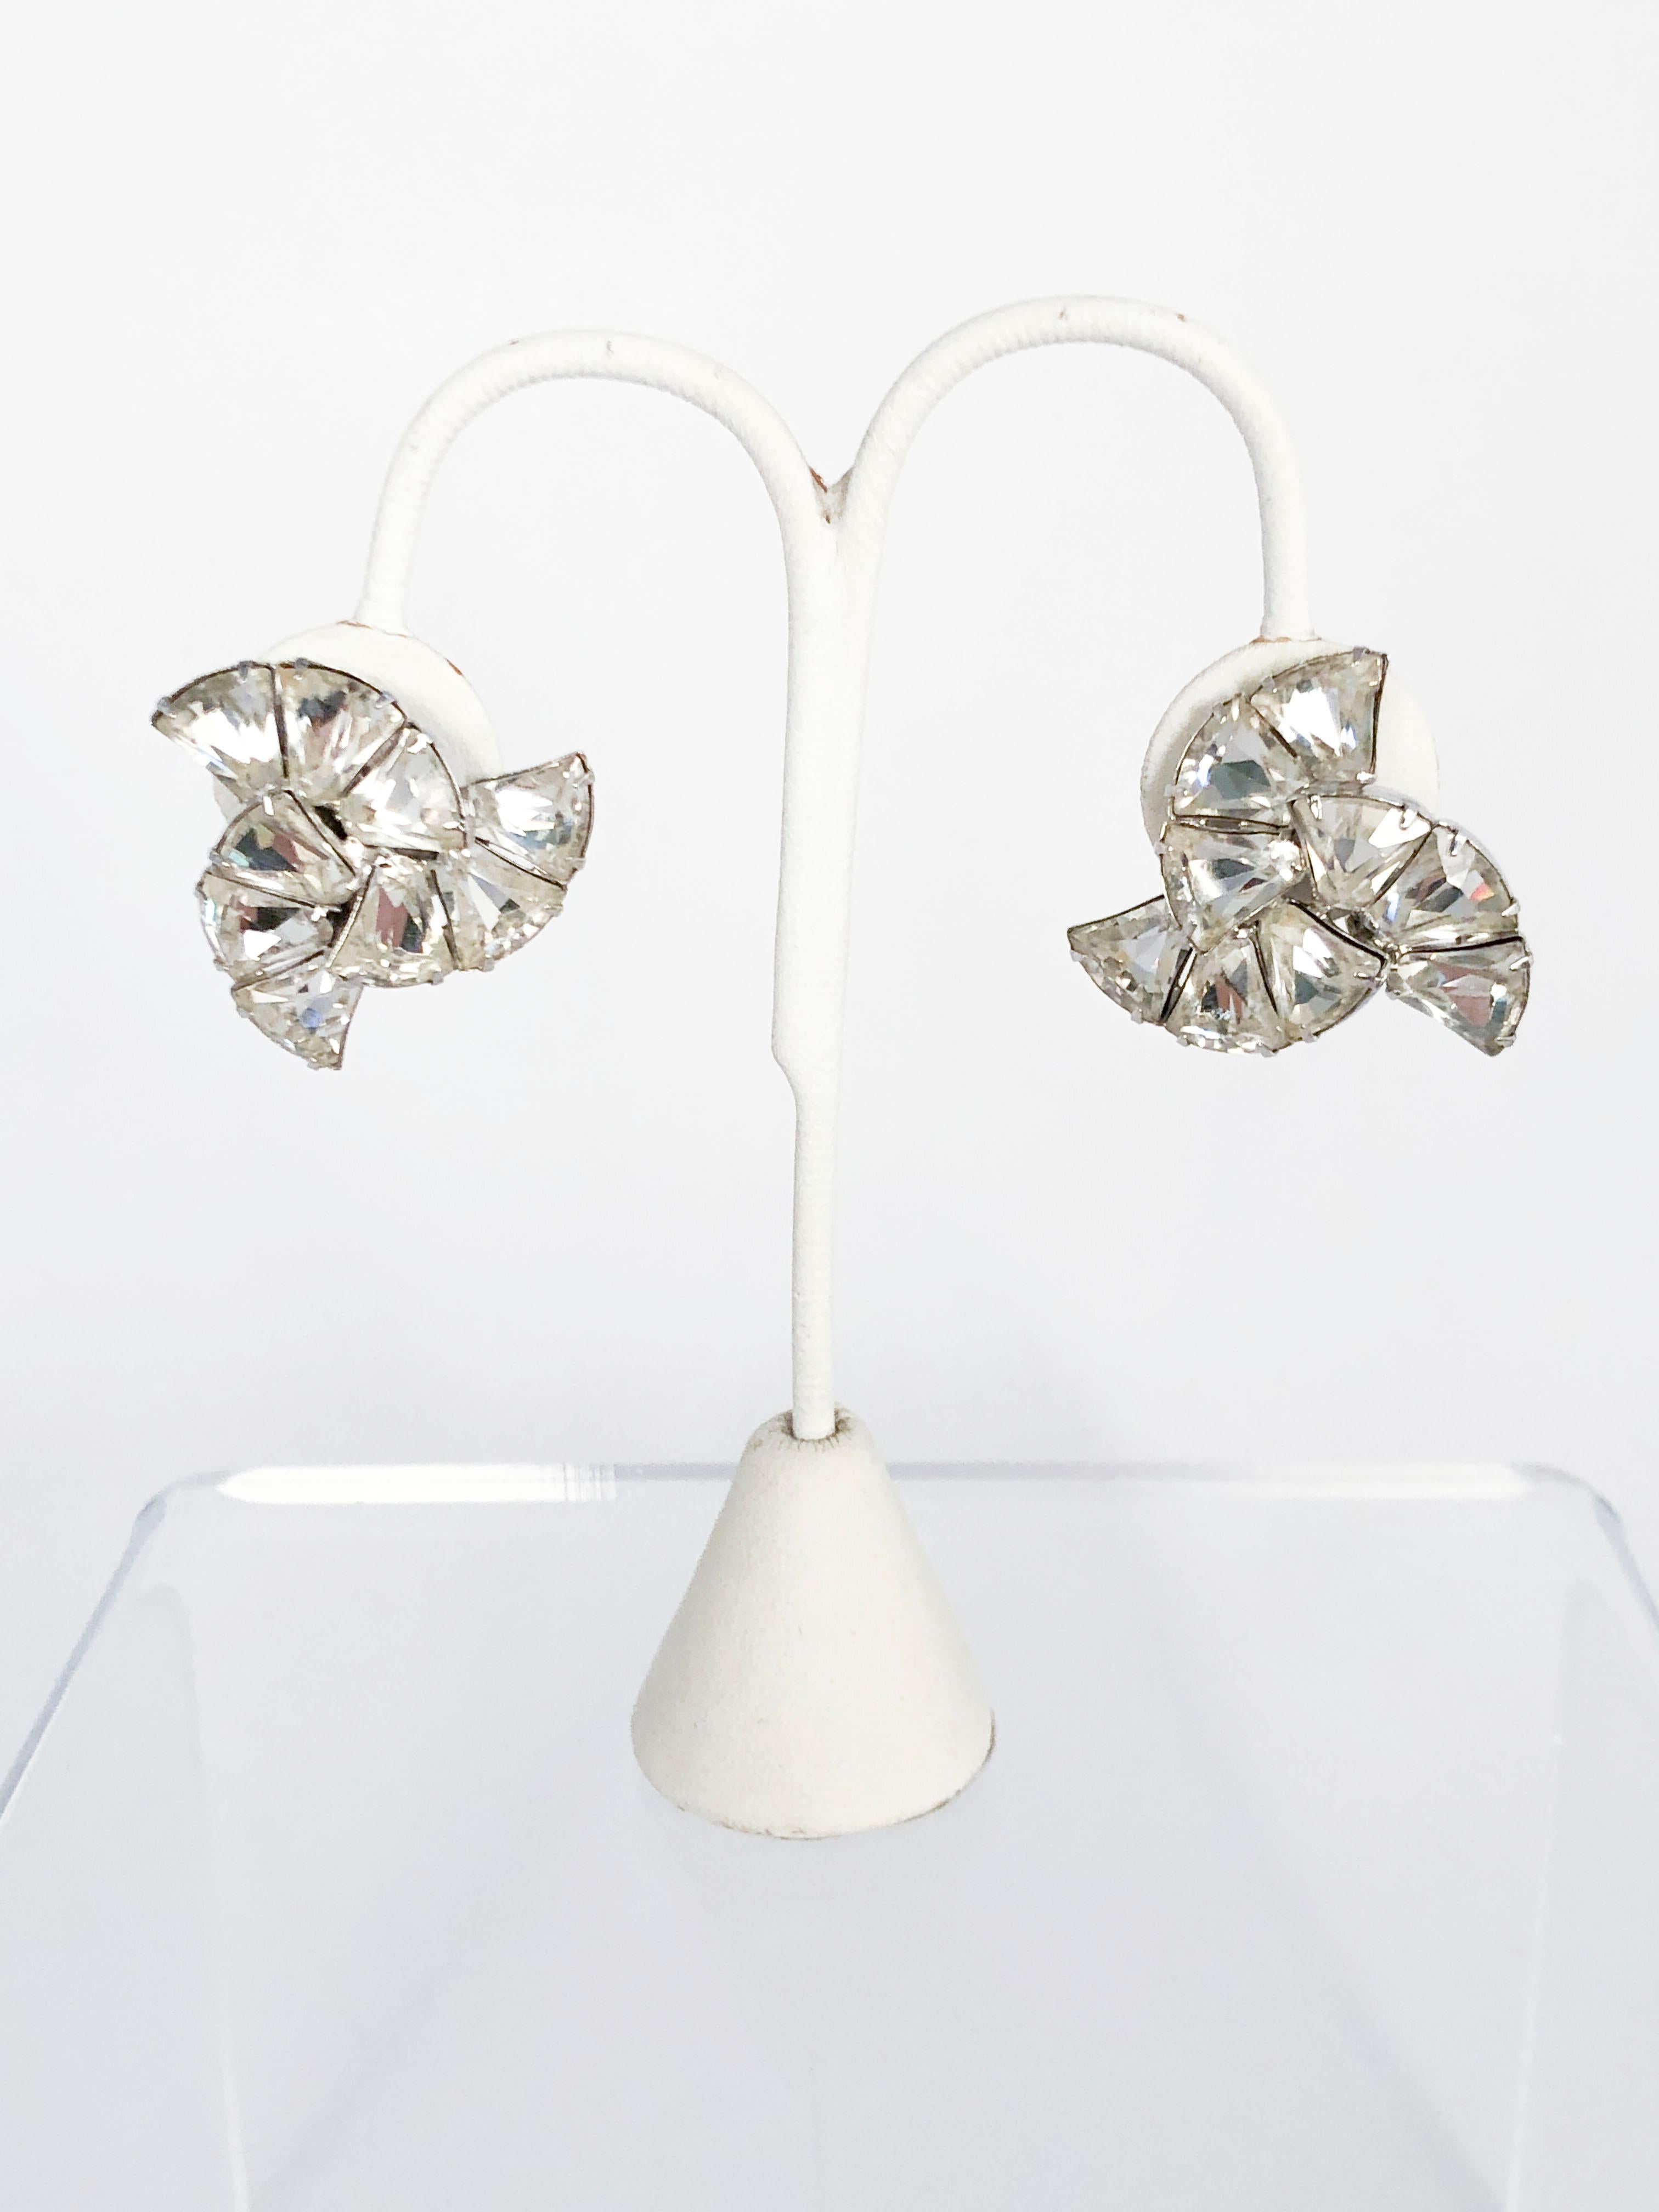 1950s eisenberg clip-on earring and brooch set with large clear rhinestones cut in various shapes. They are configured into a triangular shape and set in a silver-washed base metal. The back of the brooch has a standard brooch pin and clearly